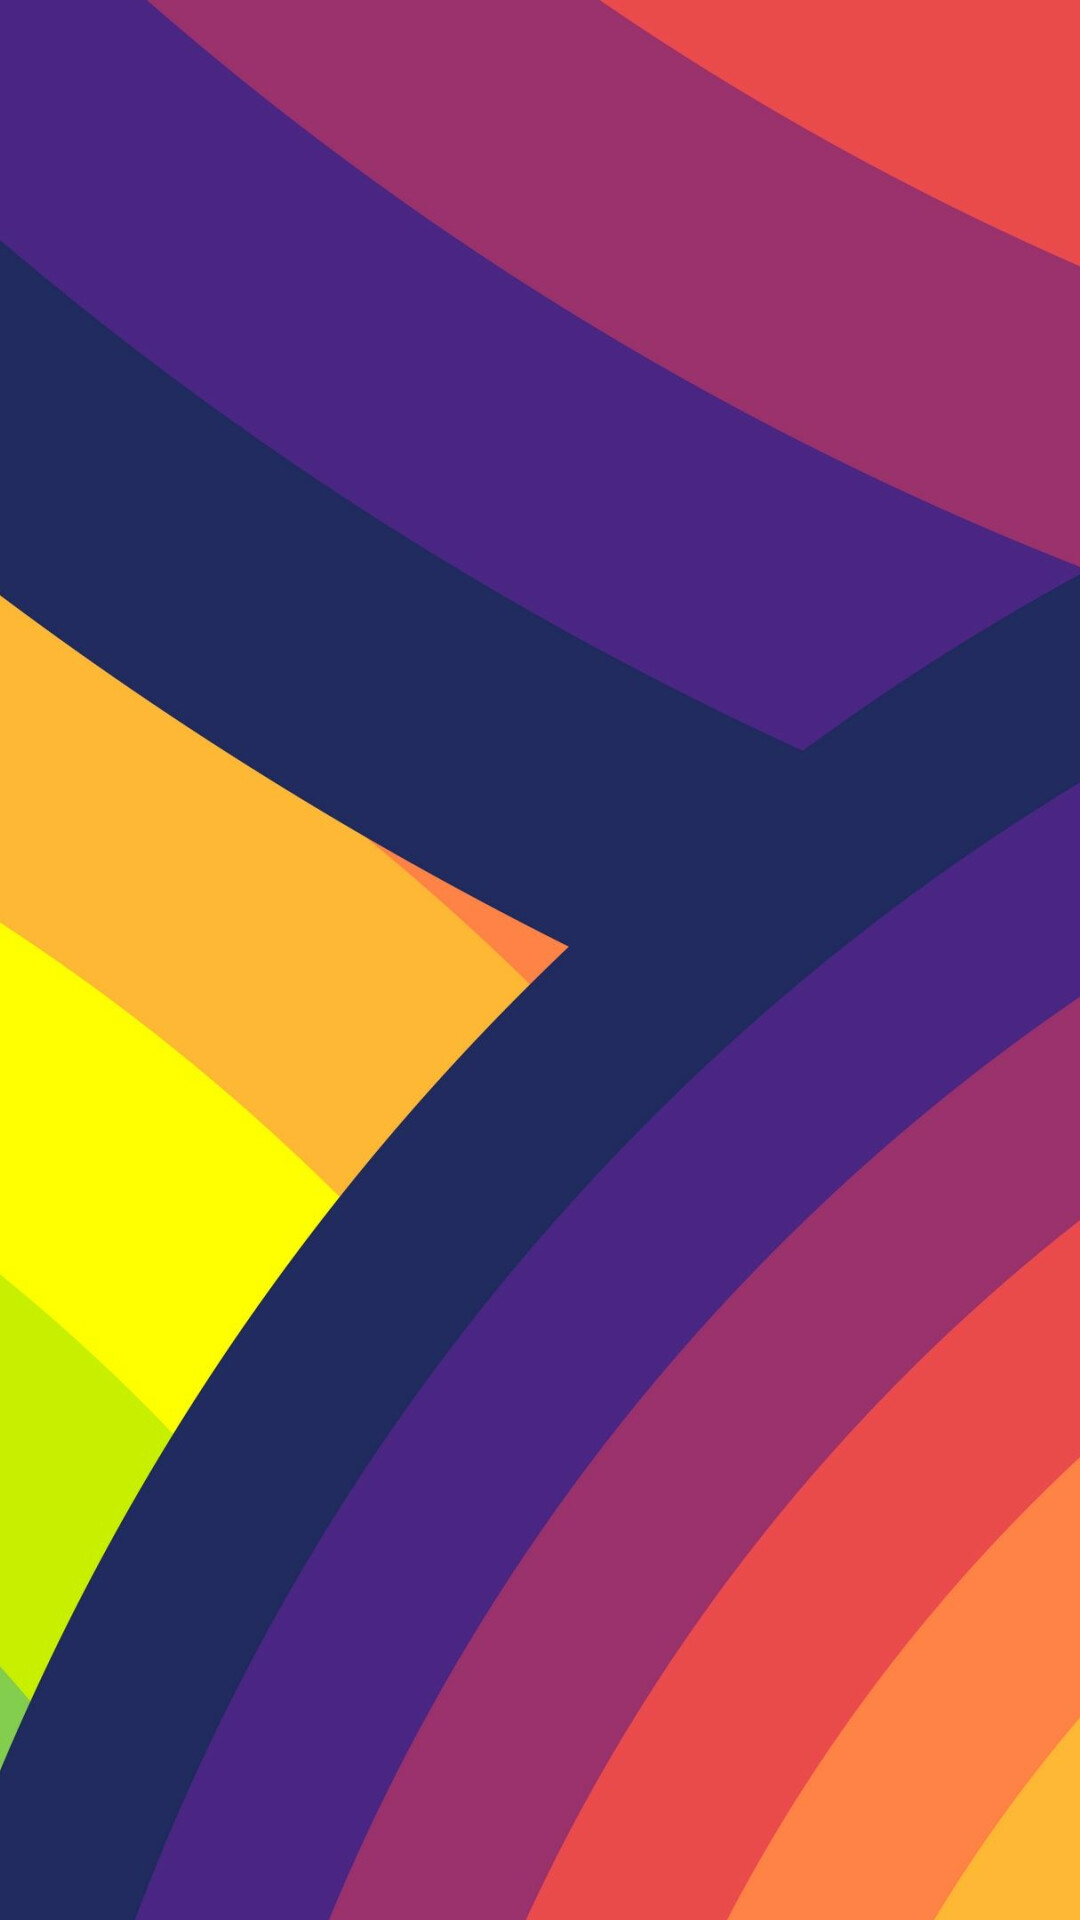 Rainbow Colors: Tints and shades, Symmetry, Multitone, Art. 1080x1920 Full HD Background.